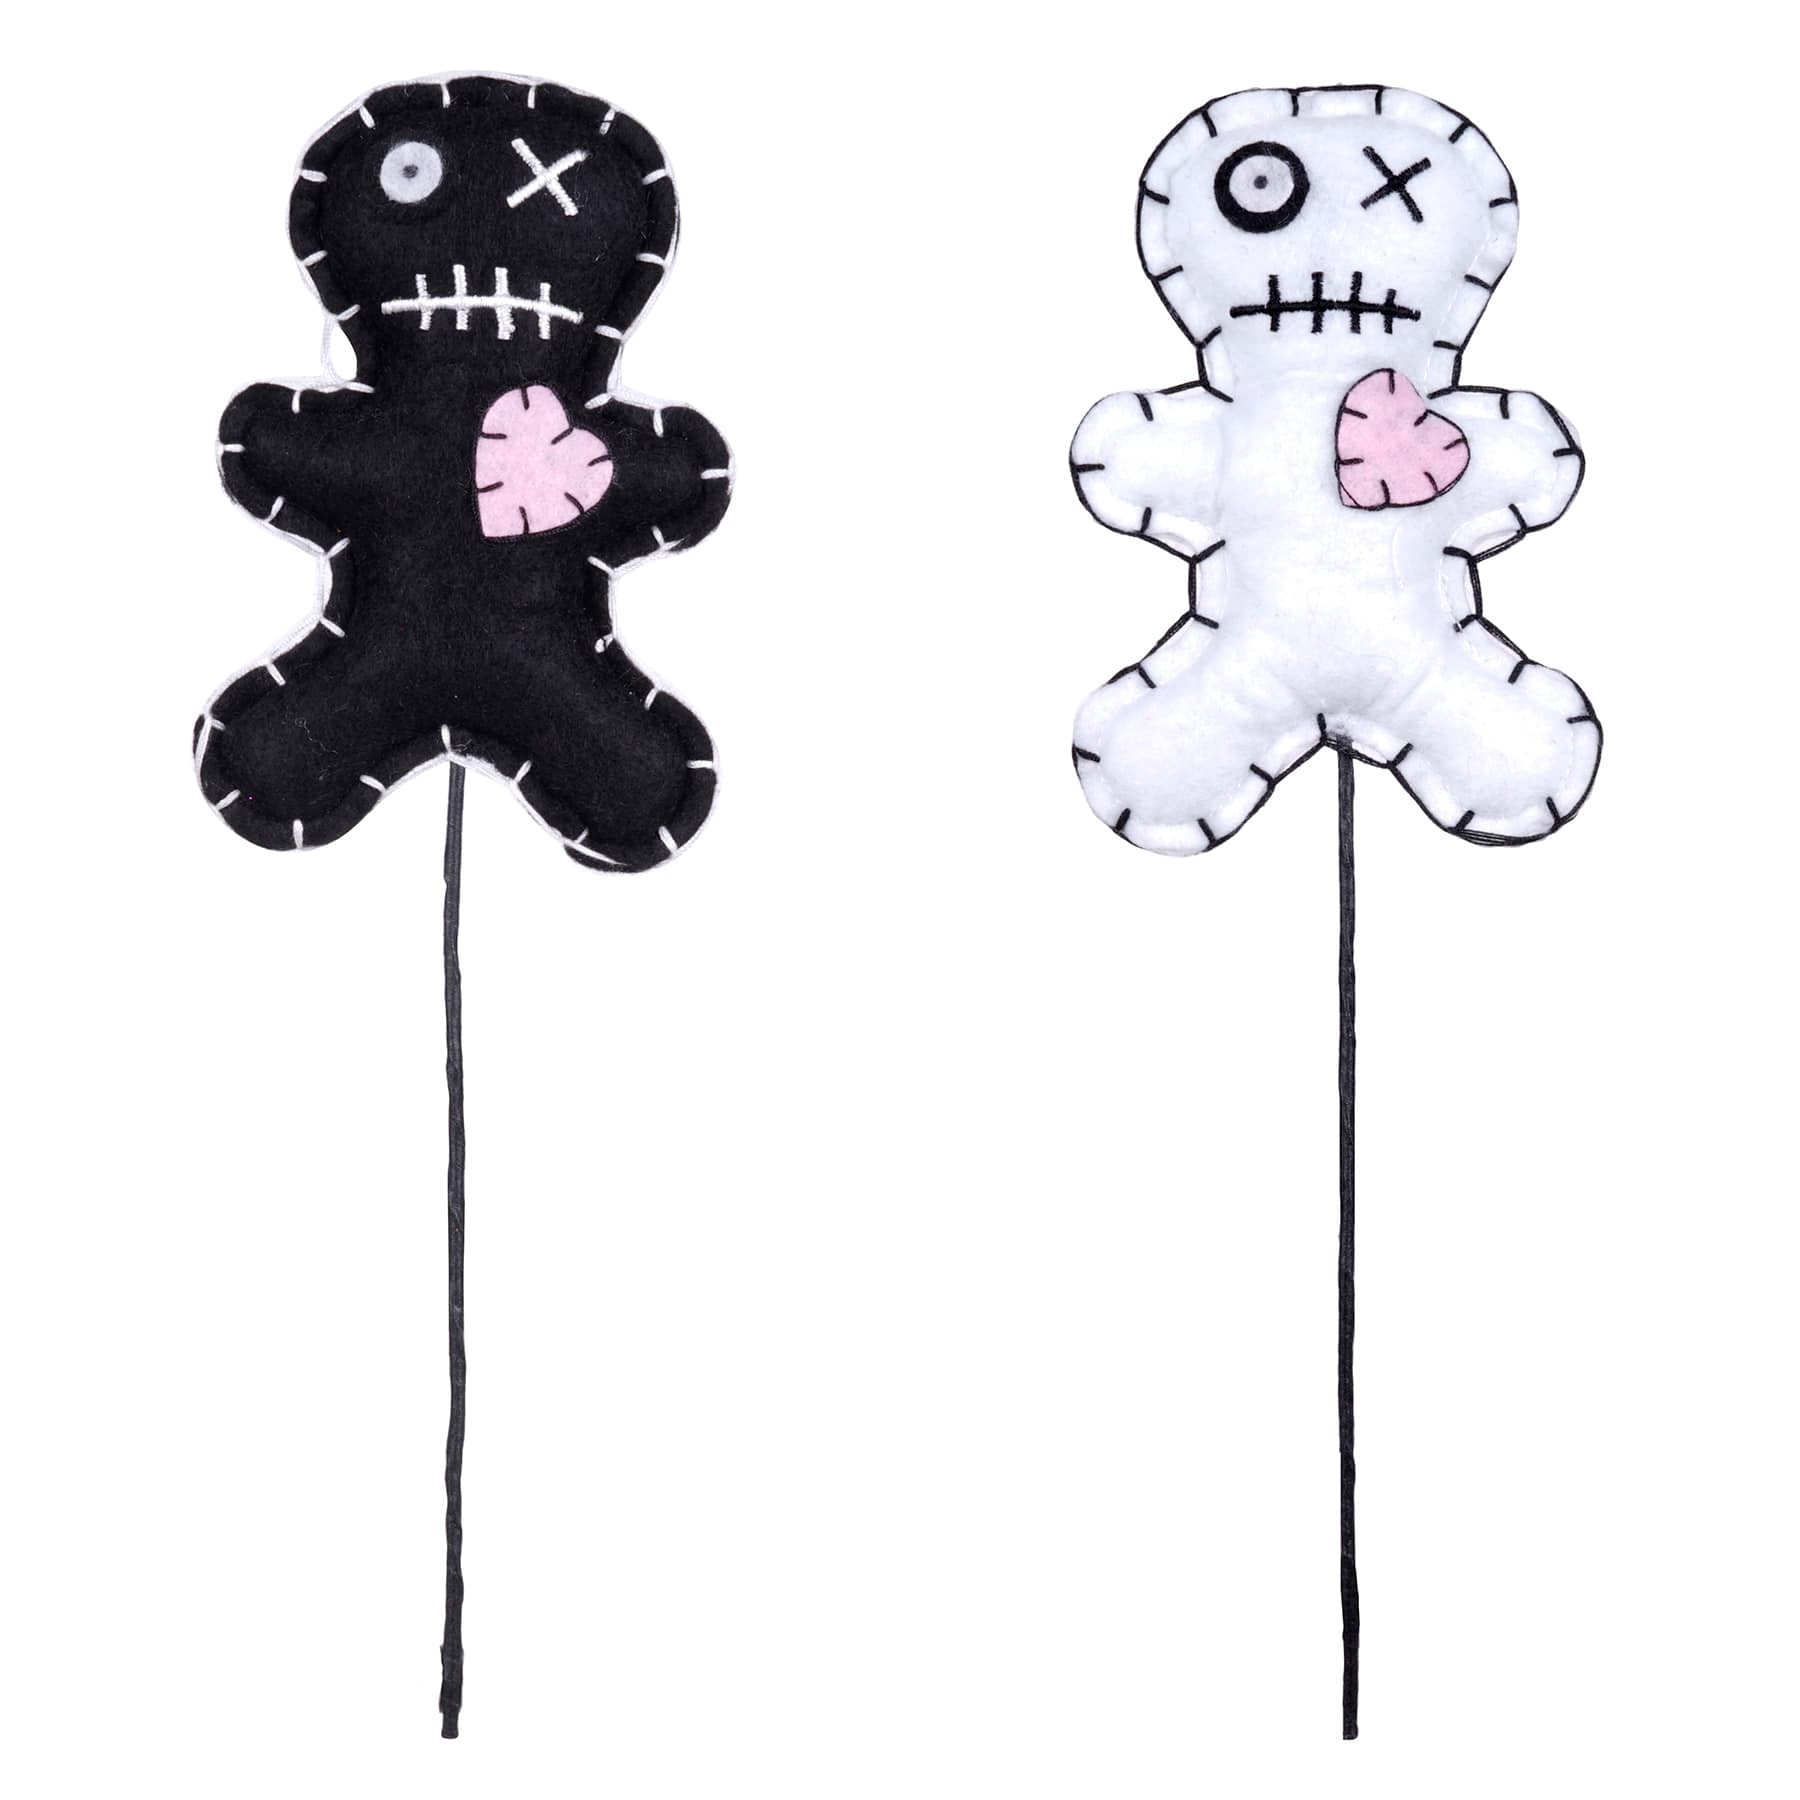 voodoo doll where to buy